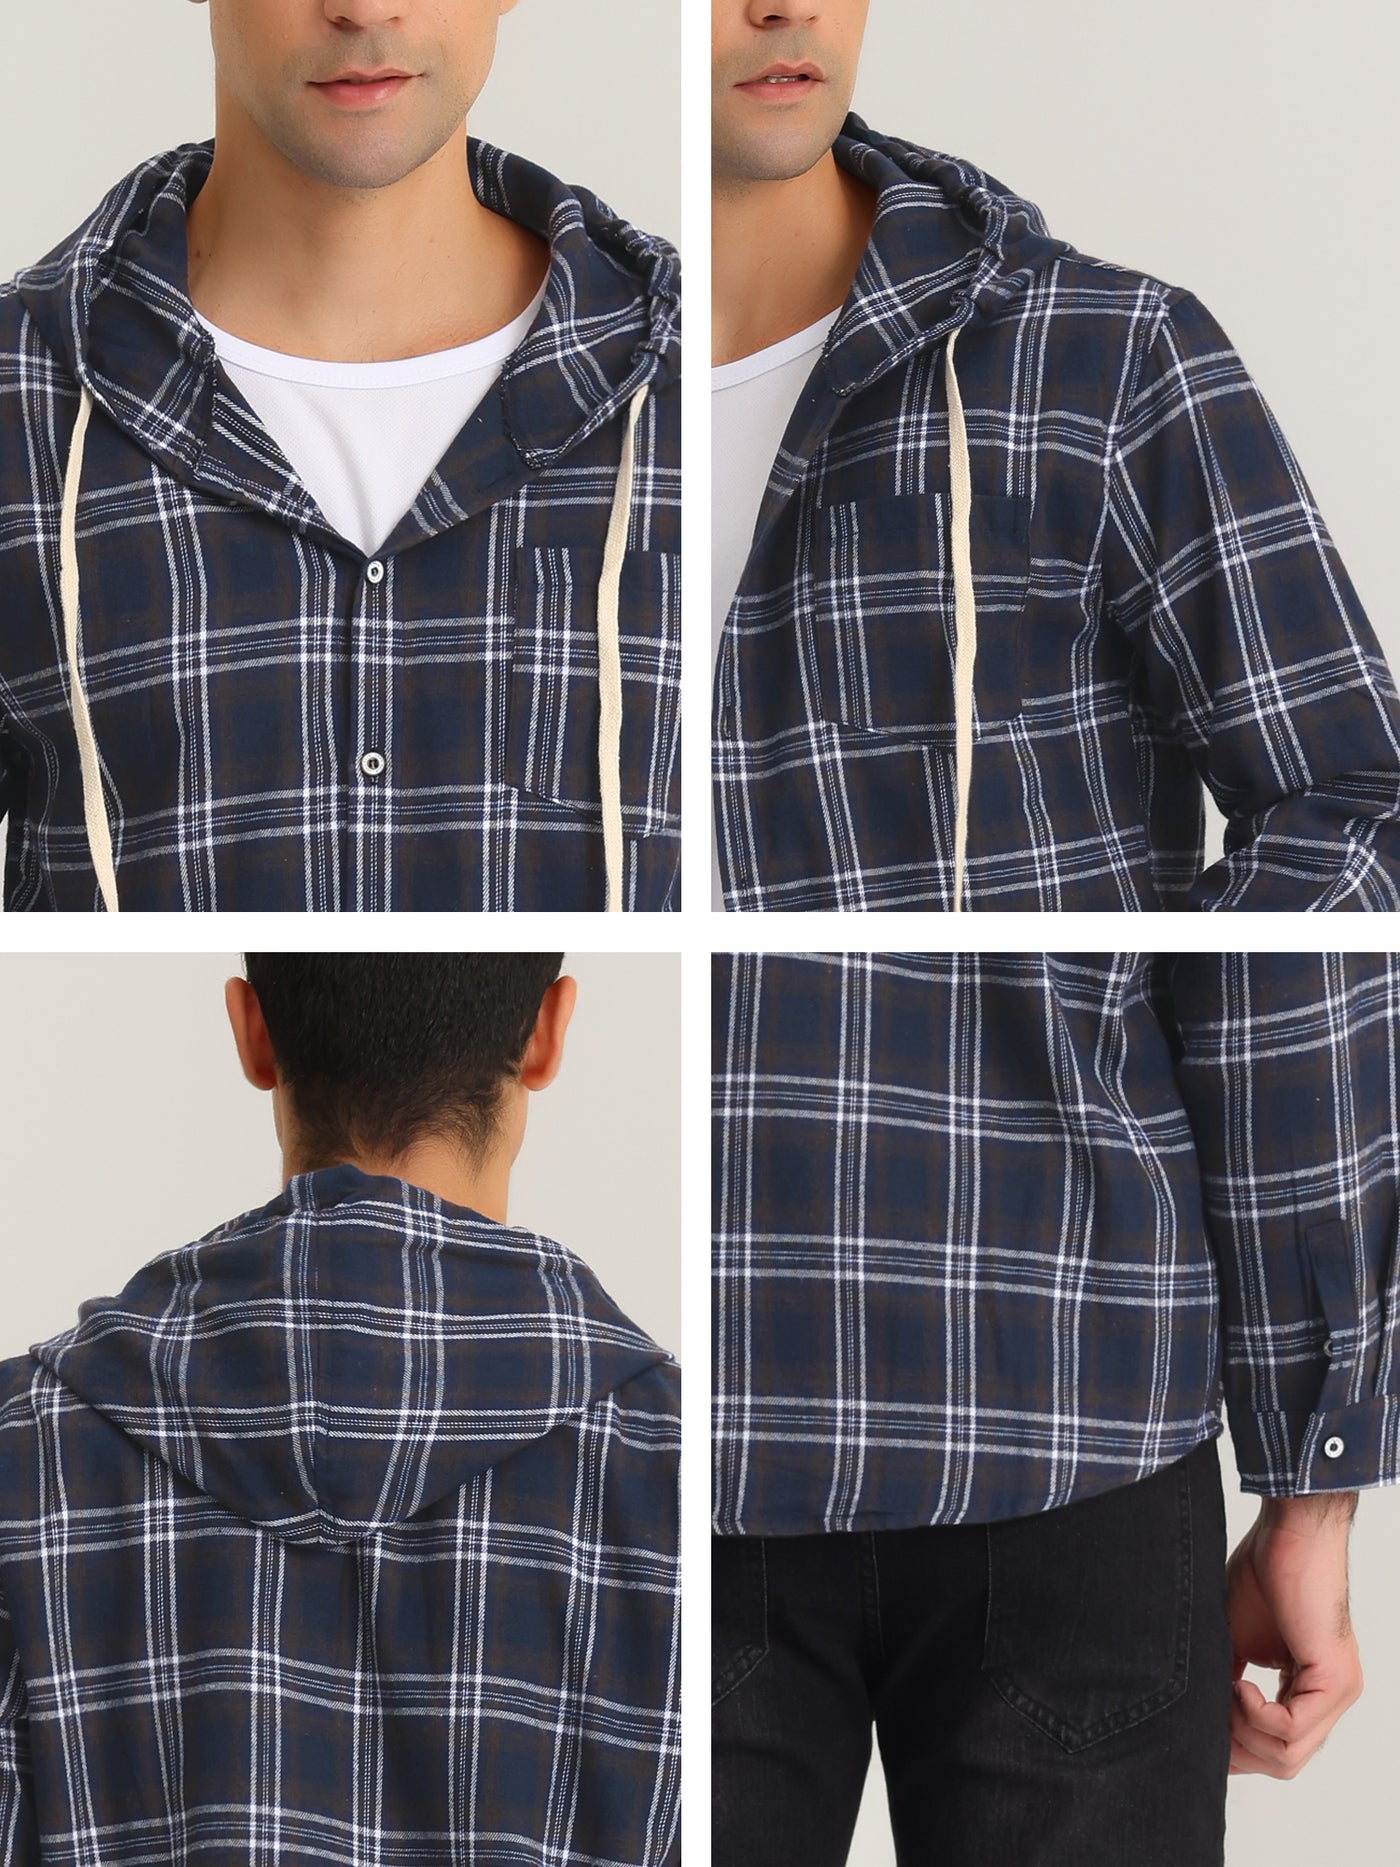 Bublédon Hoodie Plaid Long Sleeve Button Down Checked Hooded Shirt Jacket